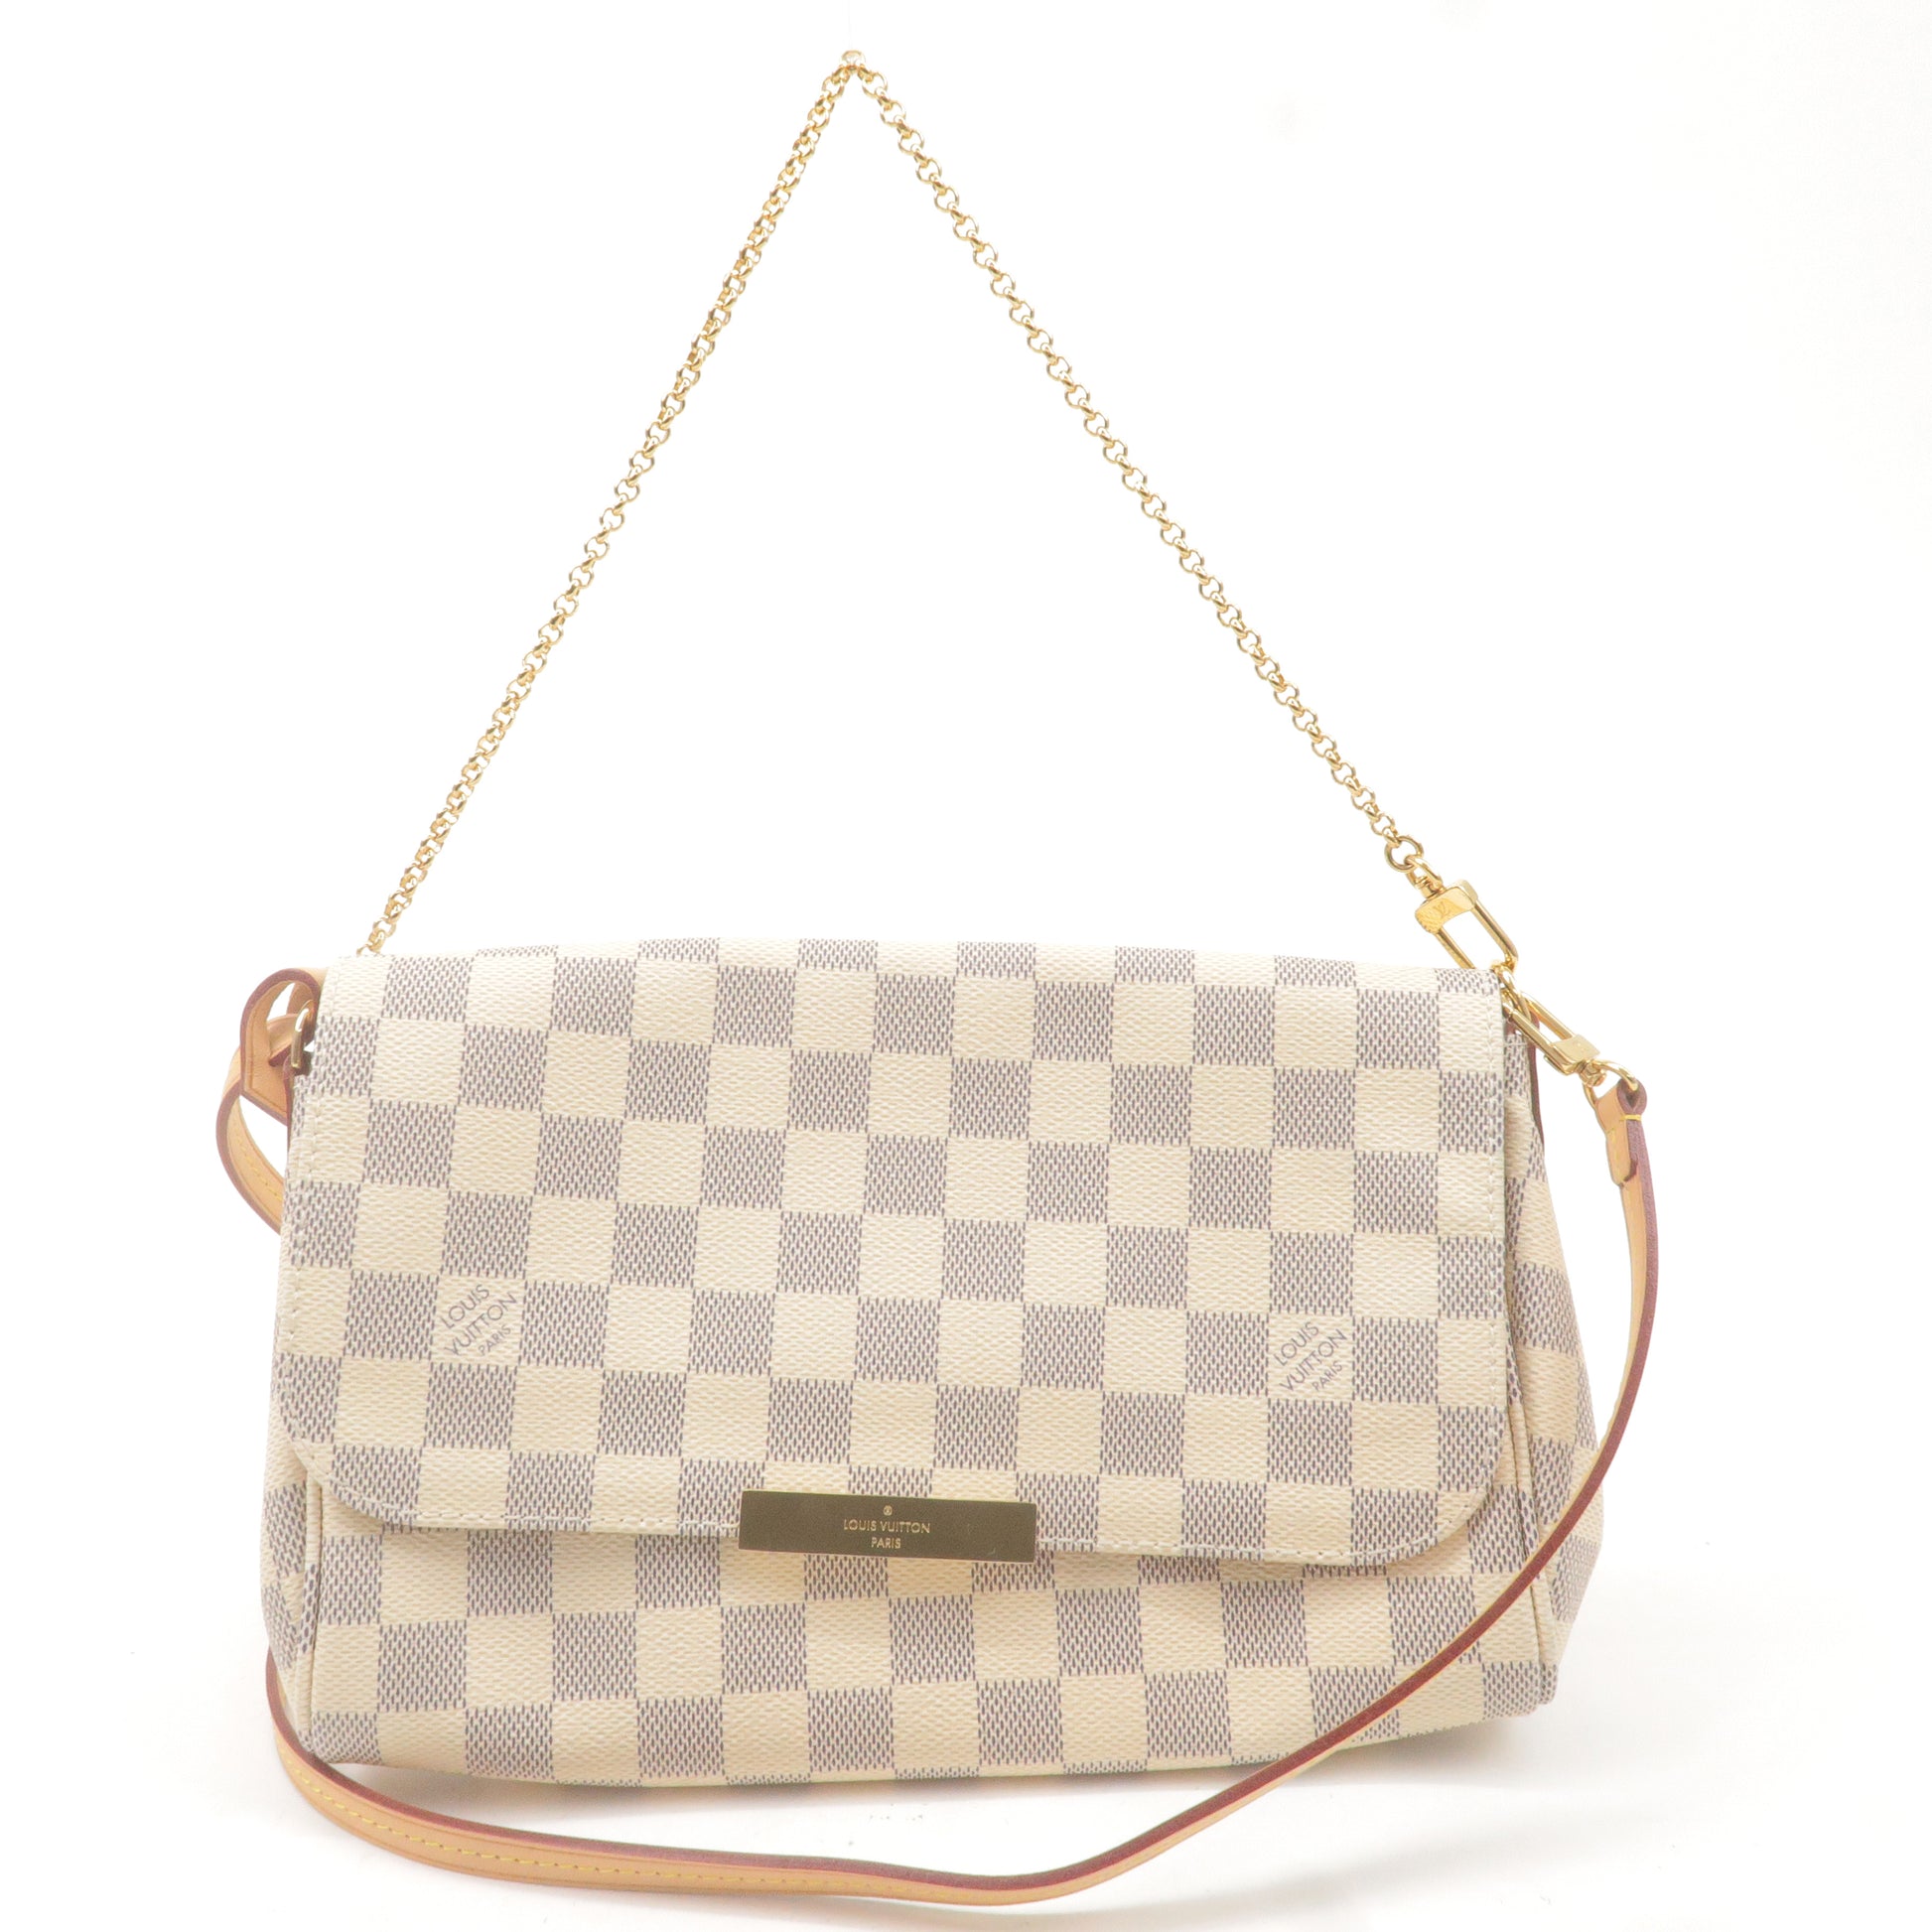 Brand New One Of 4 LOUIS VUITTON X Virgil Abloh Damier Leather